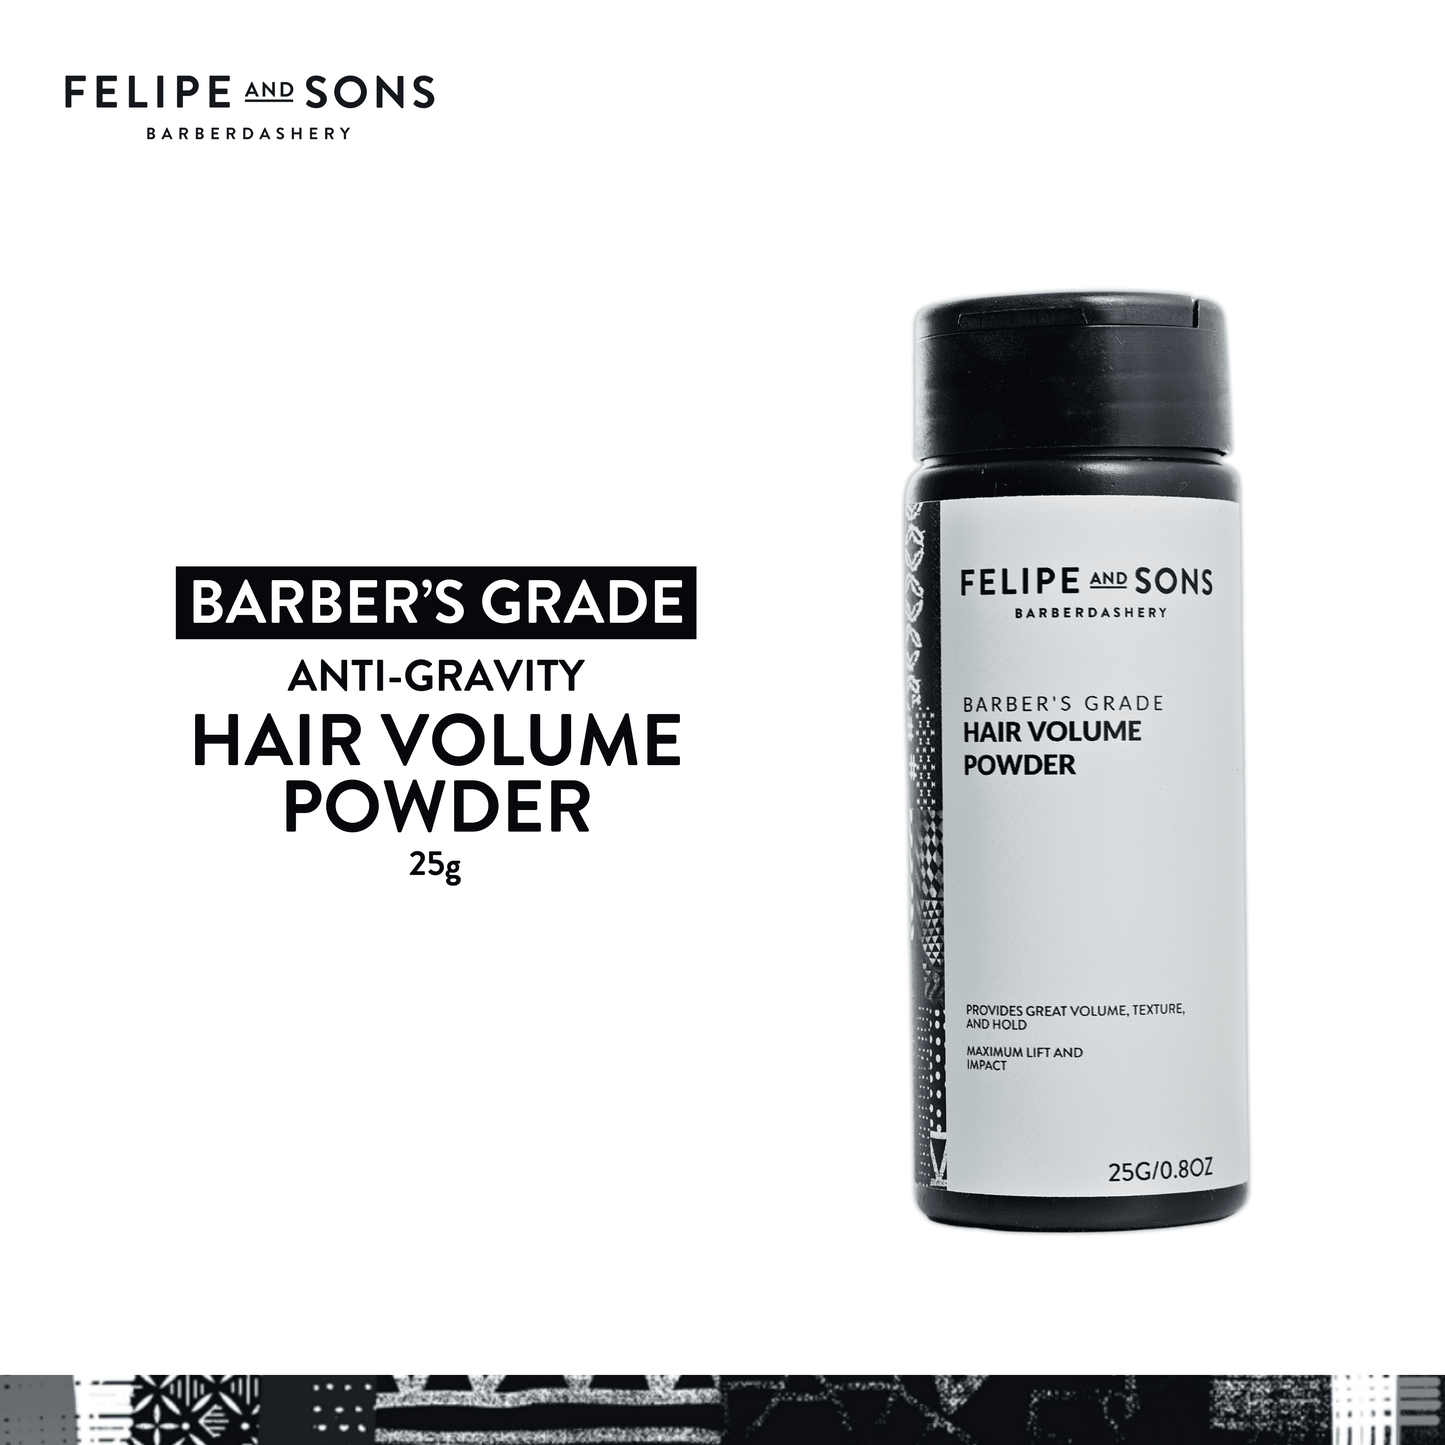 Felipe and Sons Barber's Grade Thickening and Anti-Gravity Volume Powder 25g